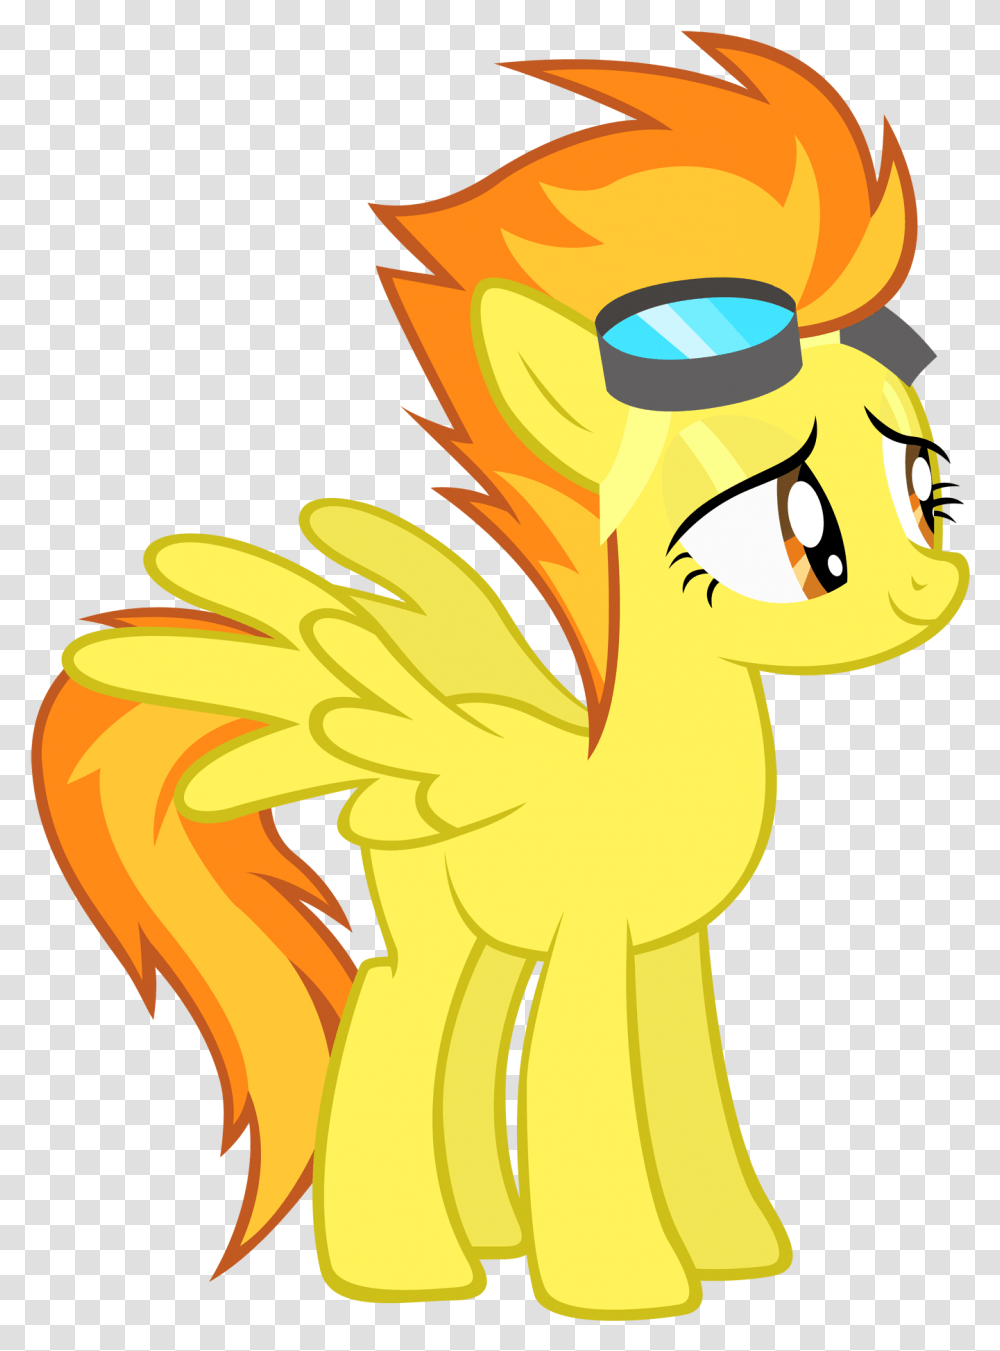 Rainbow Dash Derpy Hooves Pony Yellow Mammal Vertebrate My Little Pony Wonderbolts Spitfire, Light, Torch, Flare, Flame Transparent Png